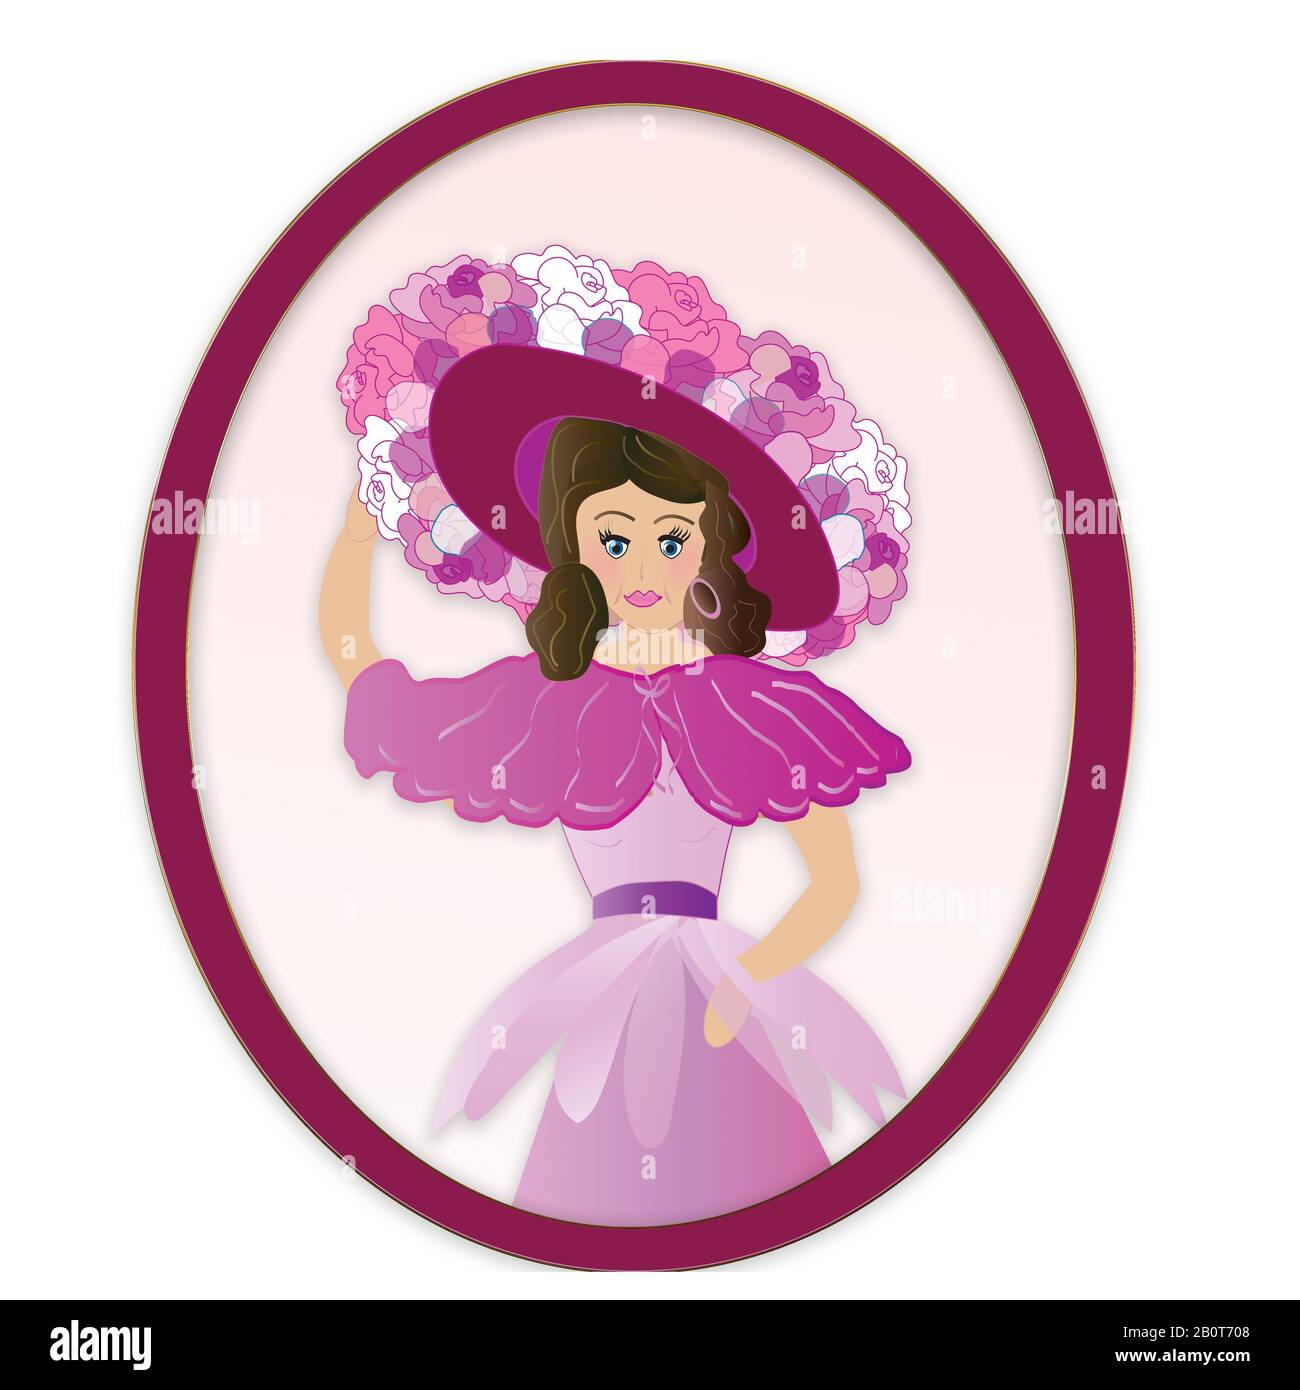 Old fashion/vintage illustration of a woman holding onto her over-sized floral hat within a purple oval border.  Shades of Purple Stock Photo